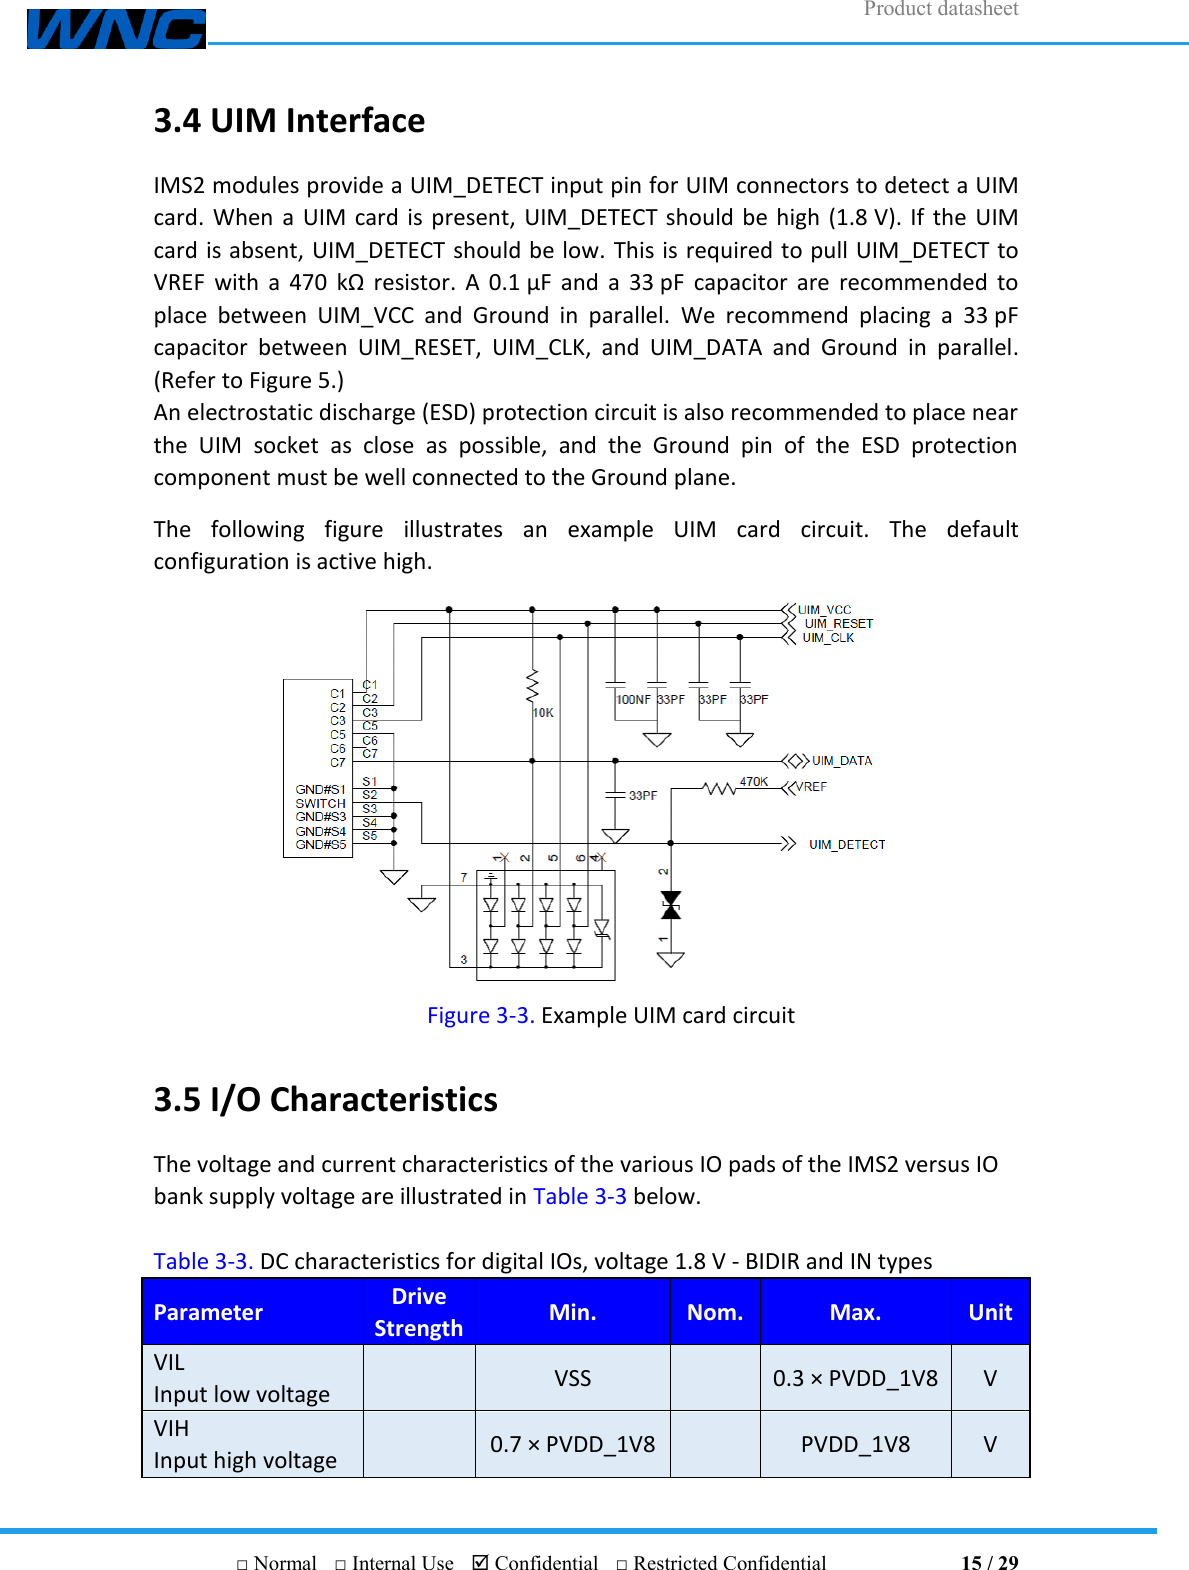 Product datasheet       □ Normal  □ Internal Use   Confidential  □ Restricted Confidential                                15 / 29 3.4 UIM Interface IMS2 modules provide a UIM_DETECT input pin for UIM connectors to detect a UIM card. When a UIM card is present,  UIM_DETECT should be high (1.8 V). If the  UIM card is absent, UIM_DETECT should be low. This is required to pull UIM_DETECT to VREF  with  a  470  kΩ resistor.  A 0.1 μF  and  a  33 pF capacitor  are  recommended  to place  between  UIM_VCC  and  Ground  in  parallel.  We  recommend  placing  a  33 pF capacitor  between  UIM_RESET,  UIM_CLK,  and  UIM_DATA  and  Ground  in  parallel. (Refer to Figure 5.) An electrostatic discharge (ESD) protection circuit is also recommended to place near the  UIM  socket  as  close  as  possible,  and  the  Ground  pin  of  the  ESD  protection component must be well connected to the Ground plane. The  following  figure  illustrates  an  example  UIM  card  circuit.  The  default configuration is active high.  Figure 3-3. Example UIM card circuit 3.5 I/O Characteristics The voltage and current characteristics of the various IO pads of the IMS2 versus IO bank supply voltage are illustrated in Table 3-3 below.  Table 3-3. DC characteristics for digital IOs, voltage 1.8 V - BIDIR and IN types Parameter Drive   Strength Min. Nom. Max. Unit VIL Input low voltage   VSS   0.3 × PVDD_1V8 V VIH Input high voltage   0.7 × PVDD_1V8   PVDD_1V8 V 